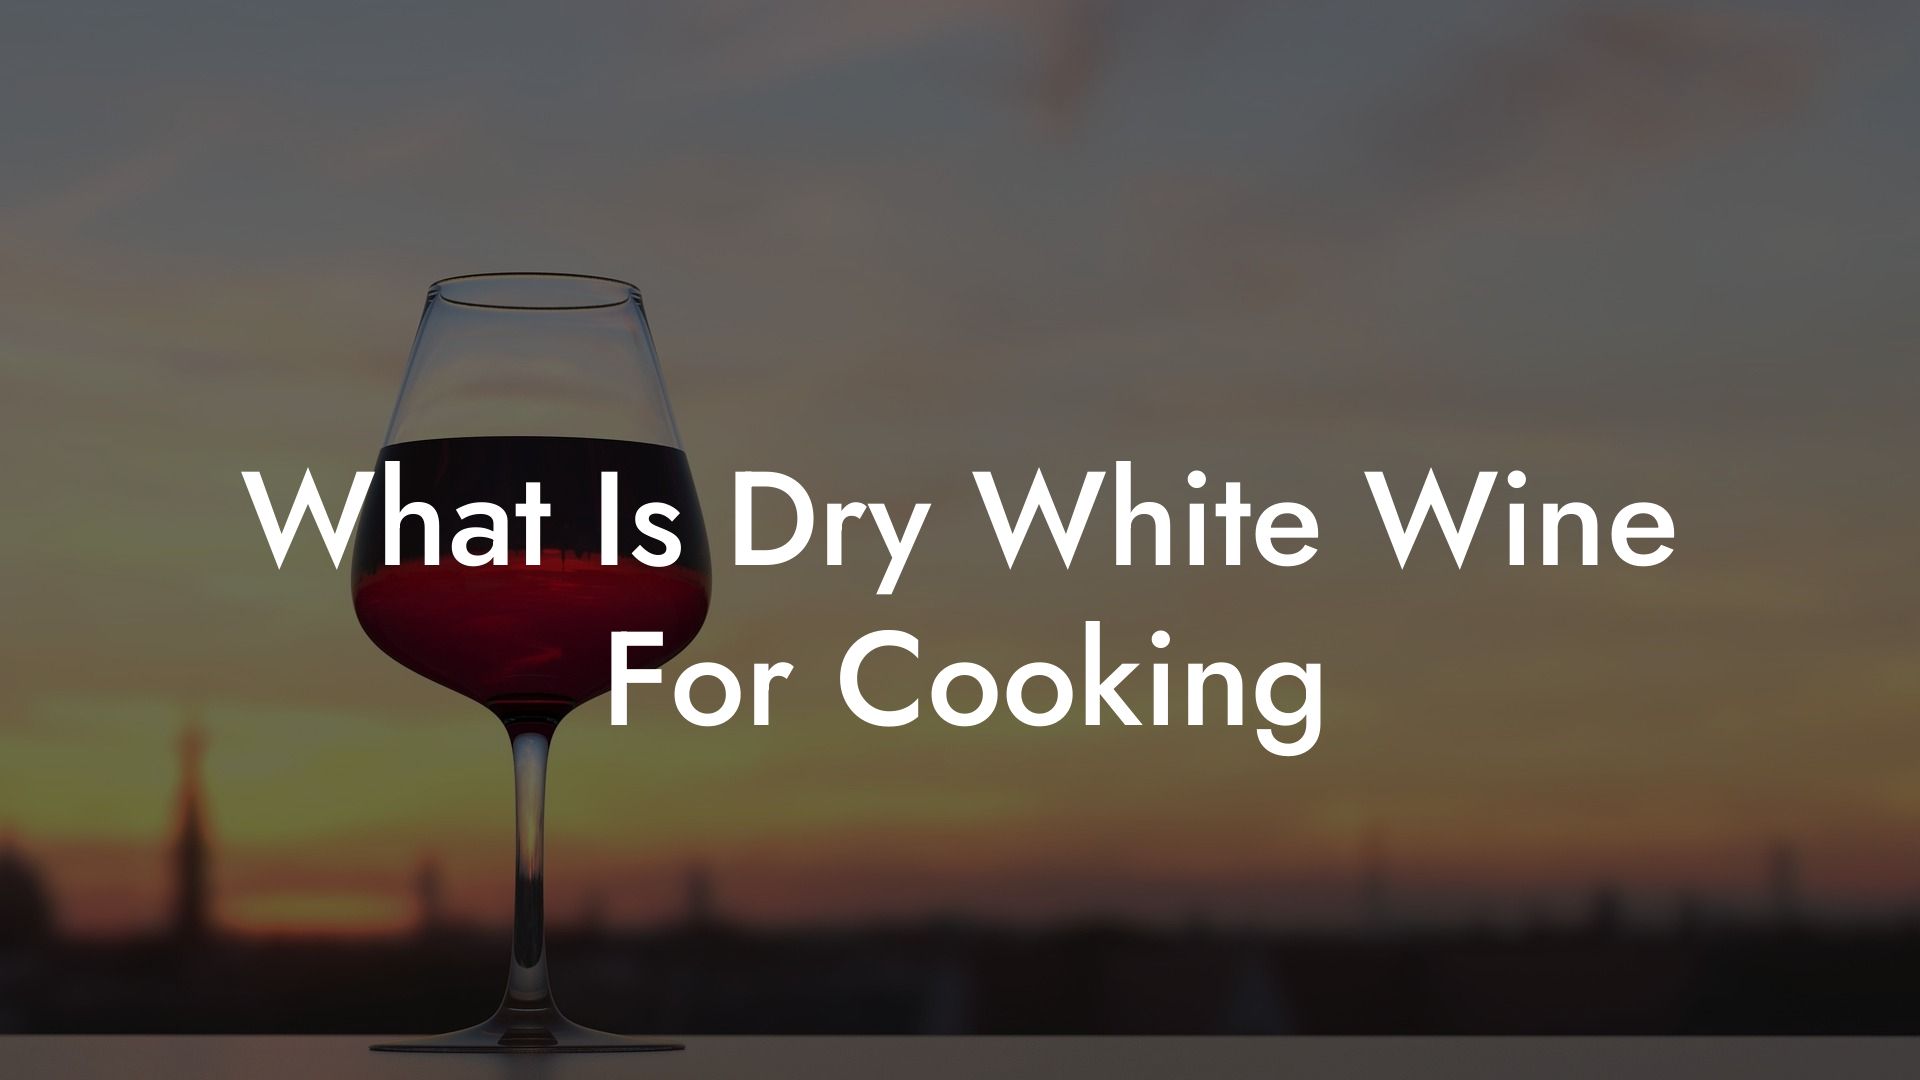 What Is Dry White Wine For Cooking